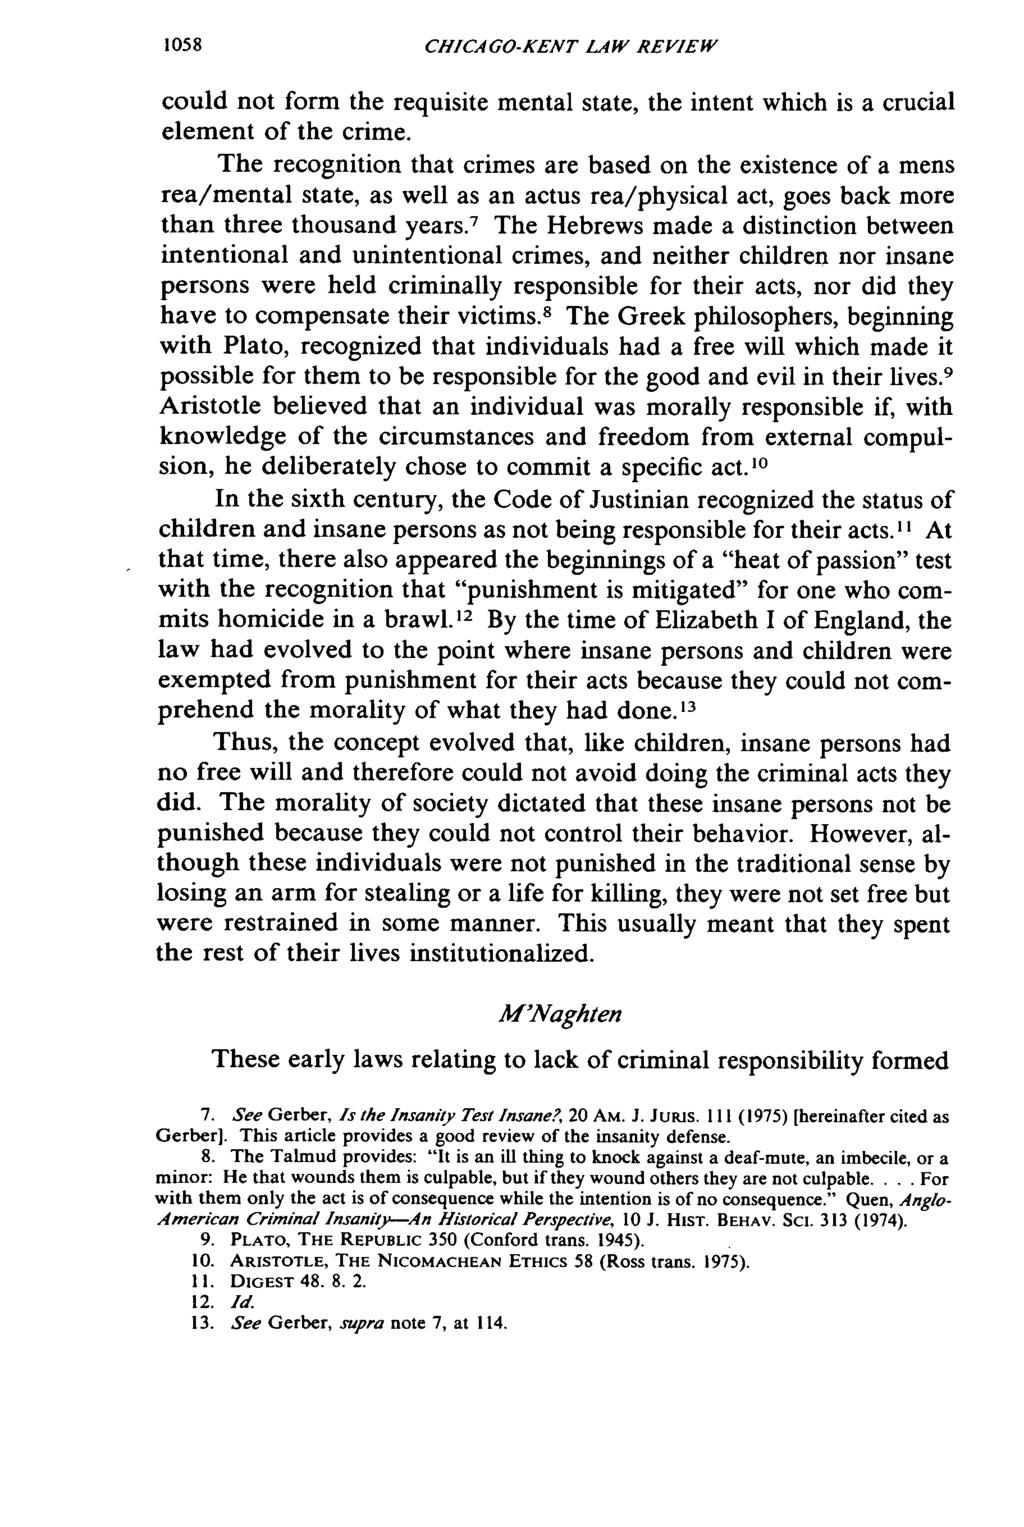 CHICAGO-KENT LAW REVIEW could not form the requisite mental state, the intent which is a crucial element of the crime.